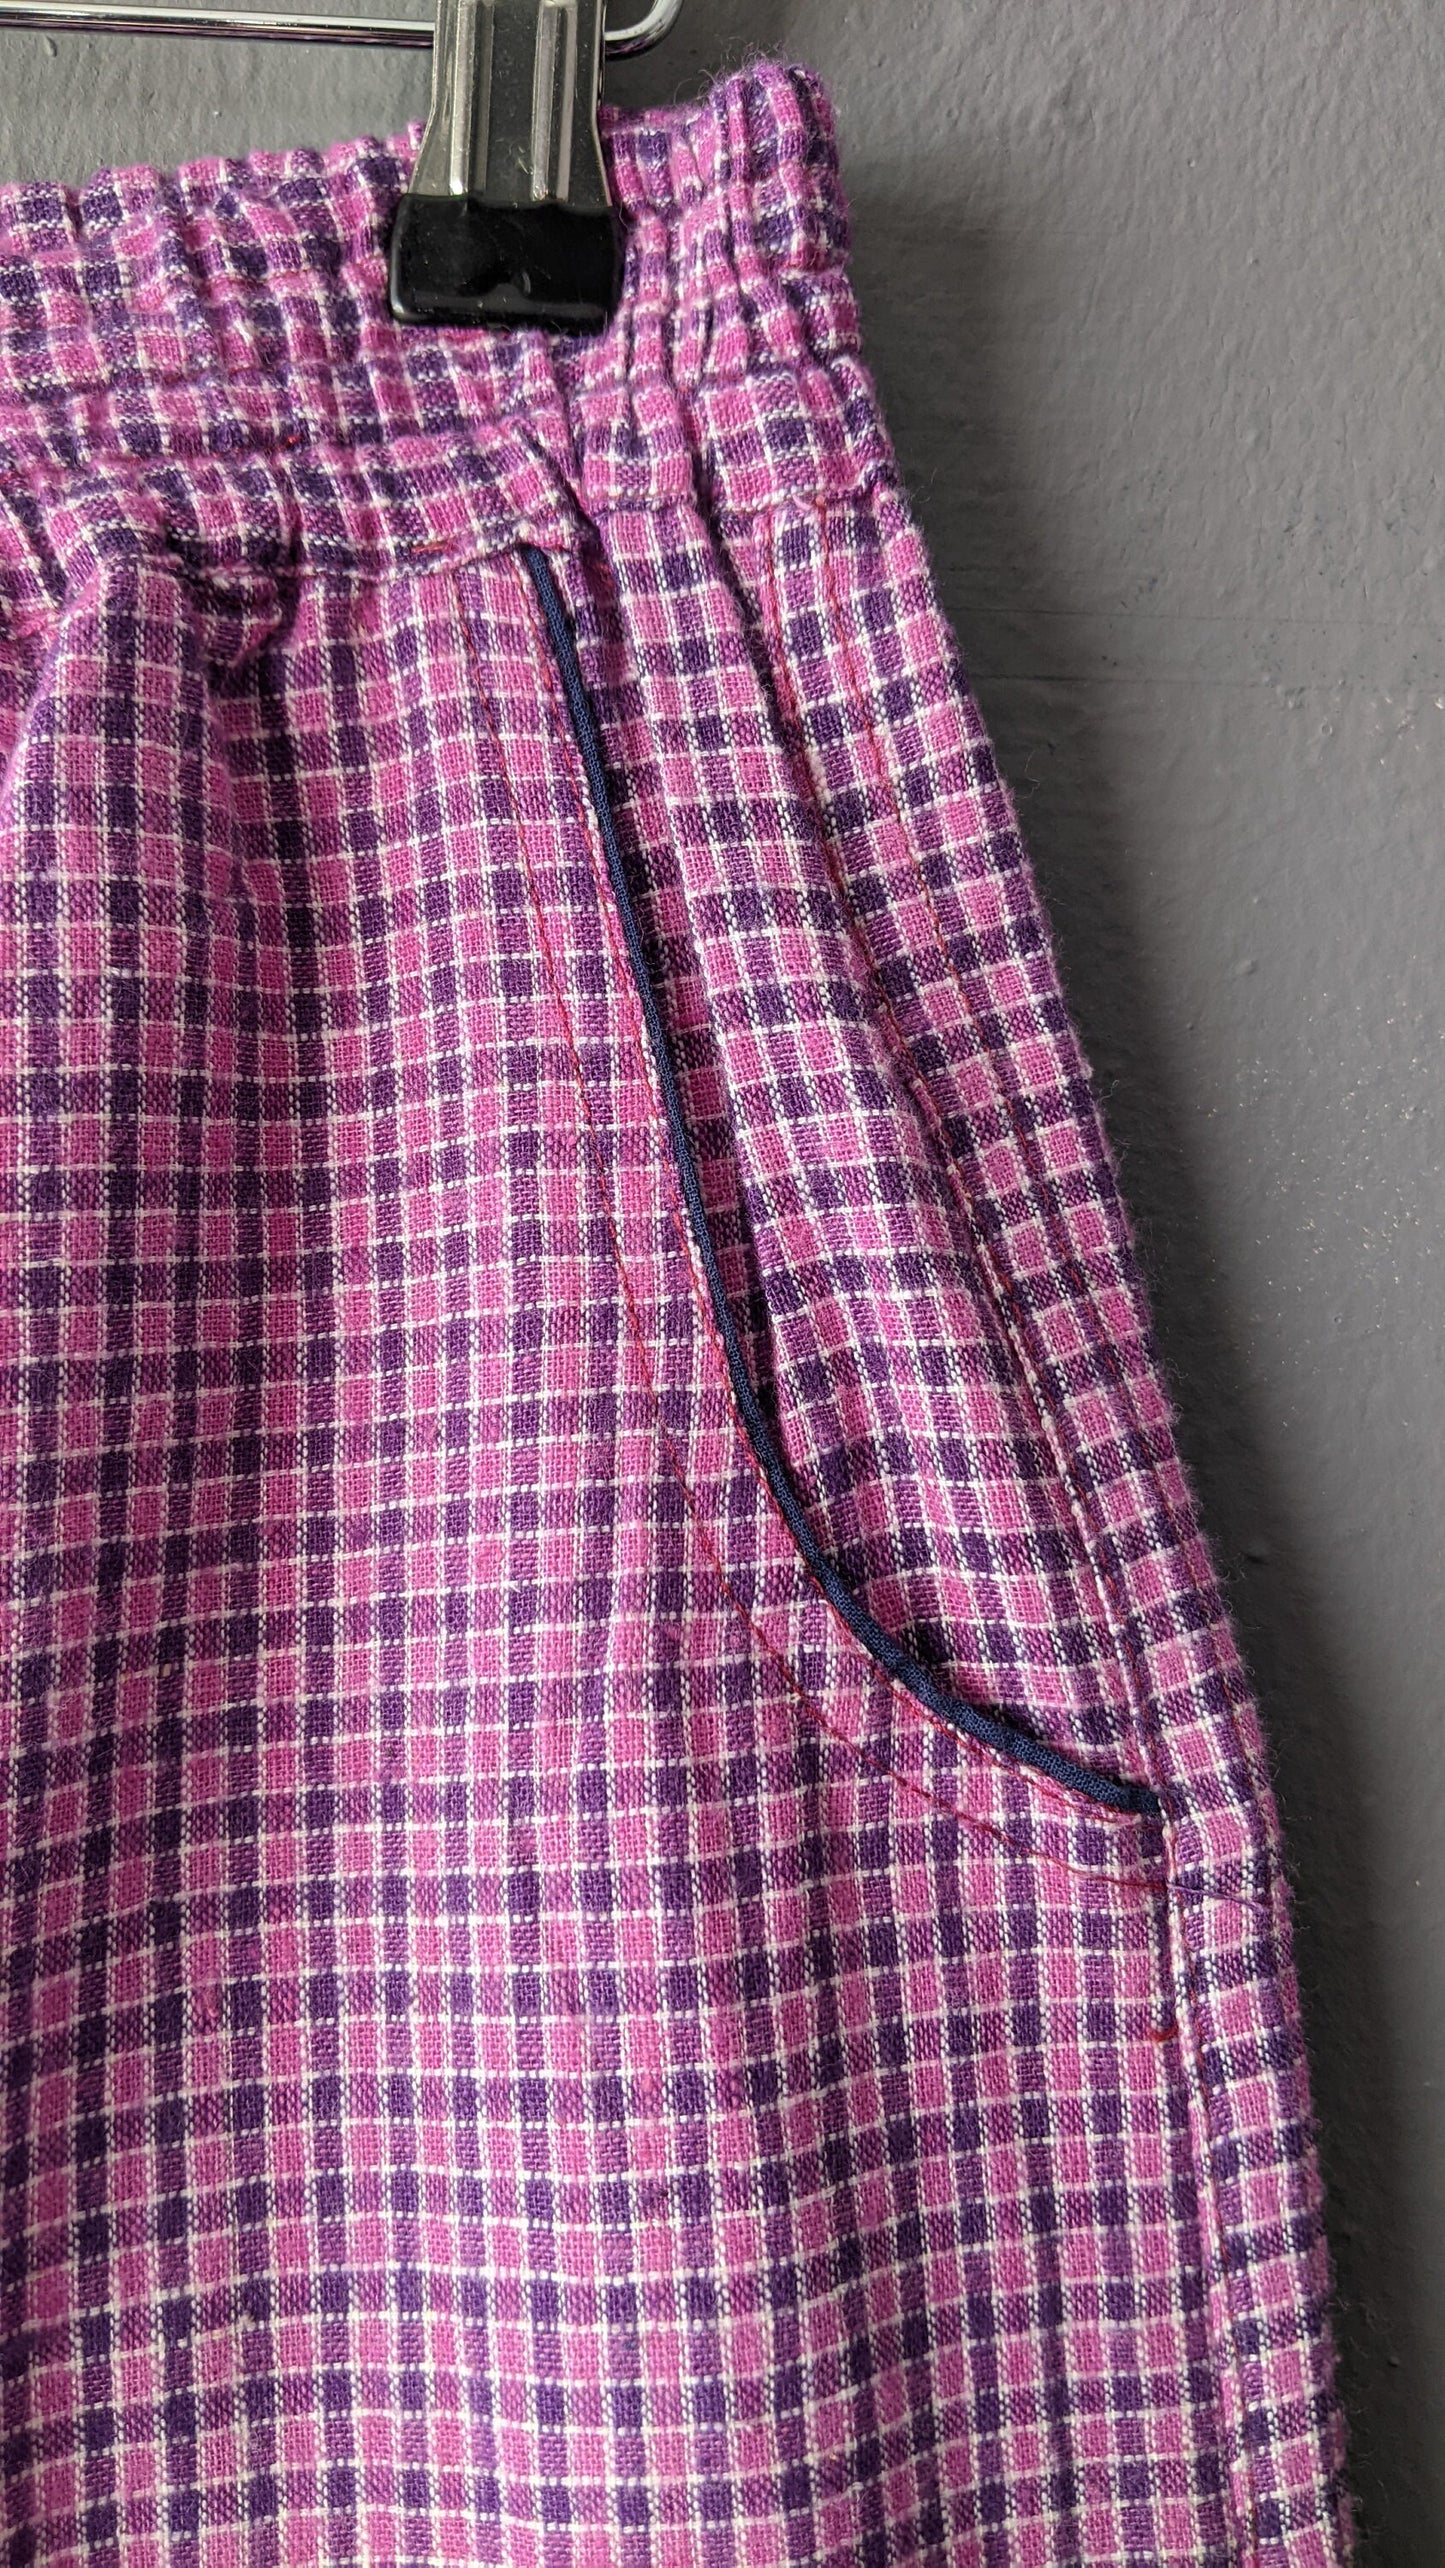 80s Pink and Purple Check Trousers, Cotton Tapered Fit, Size Medium